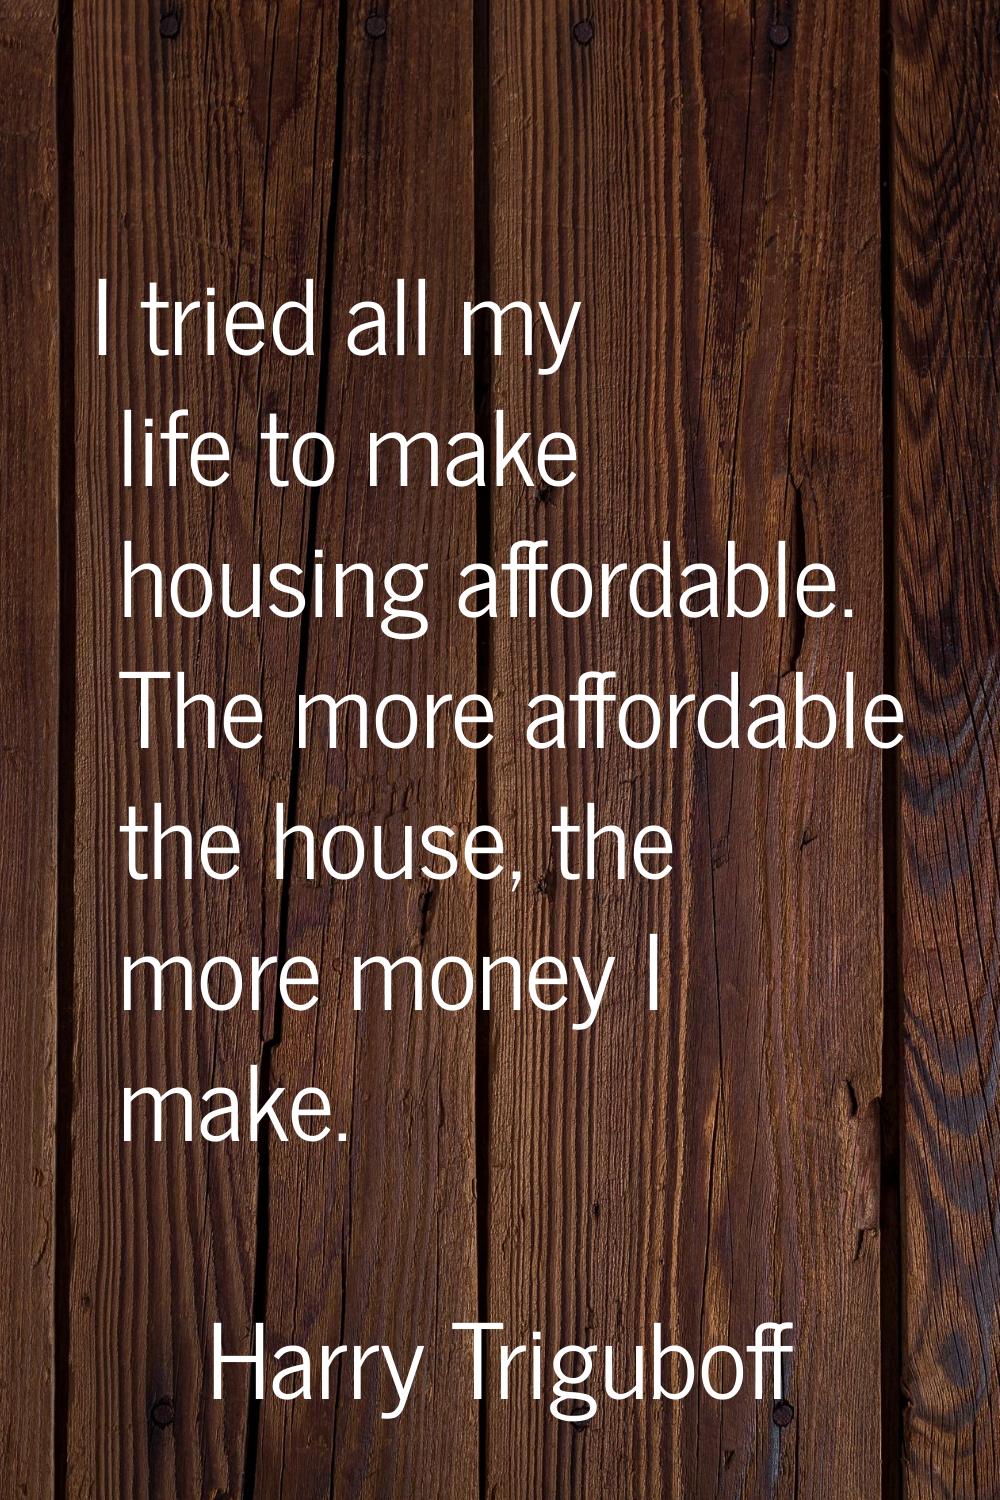 I tried all my life to make housing affordable. The more affordable the house, the more money I mak